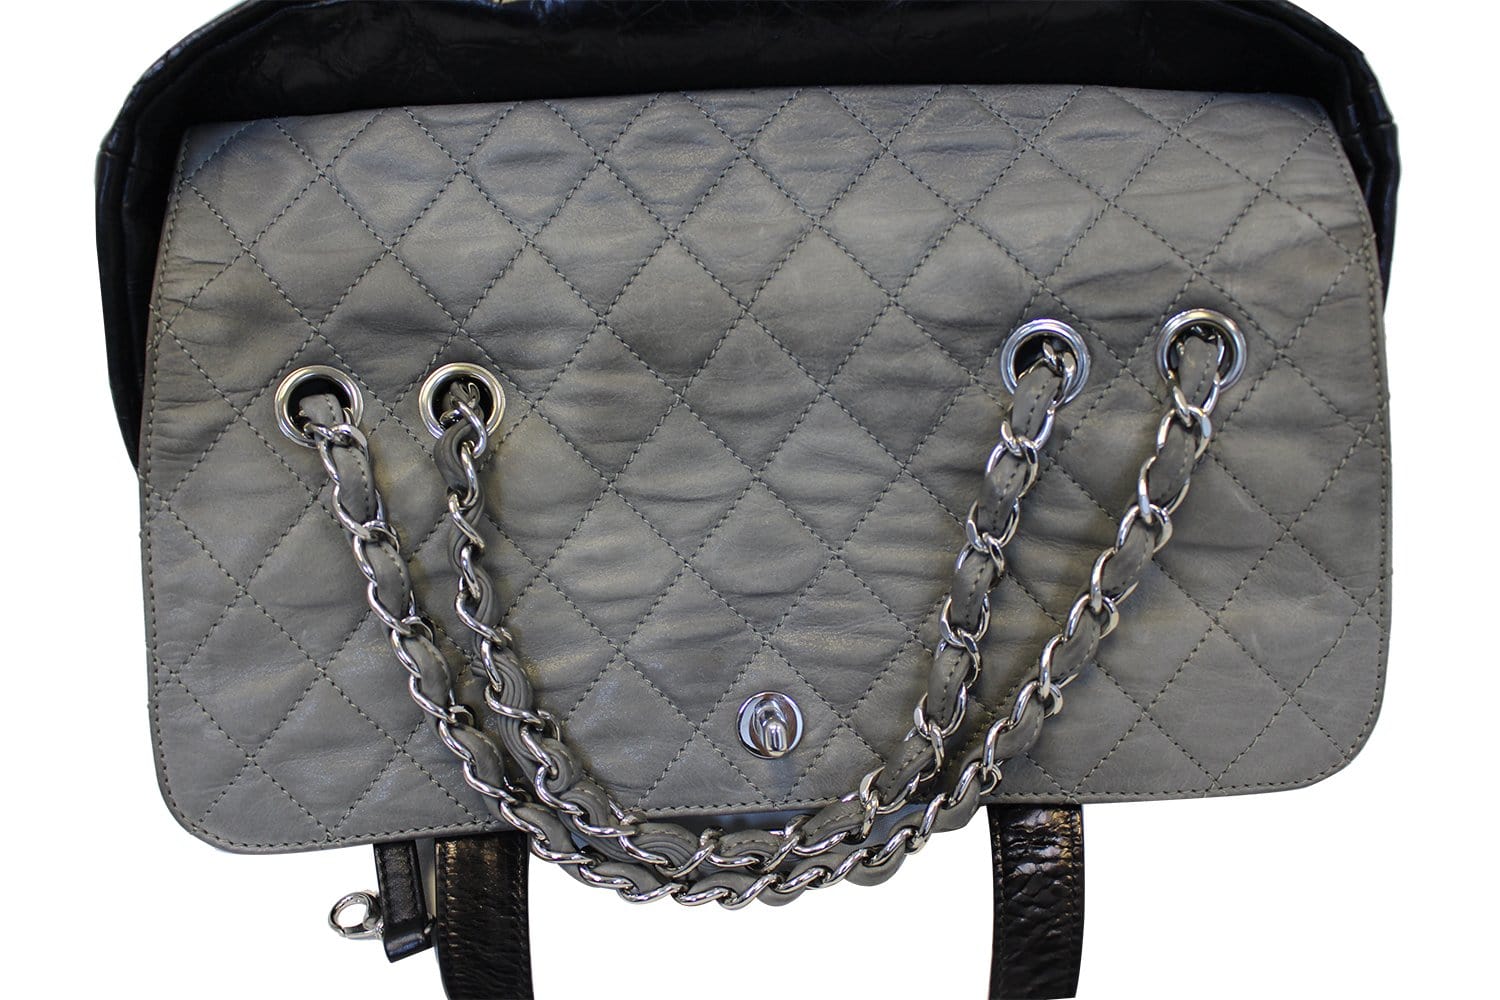 Chanel Tote Bag Black Leather 2 Way For Women